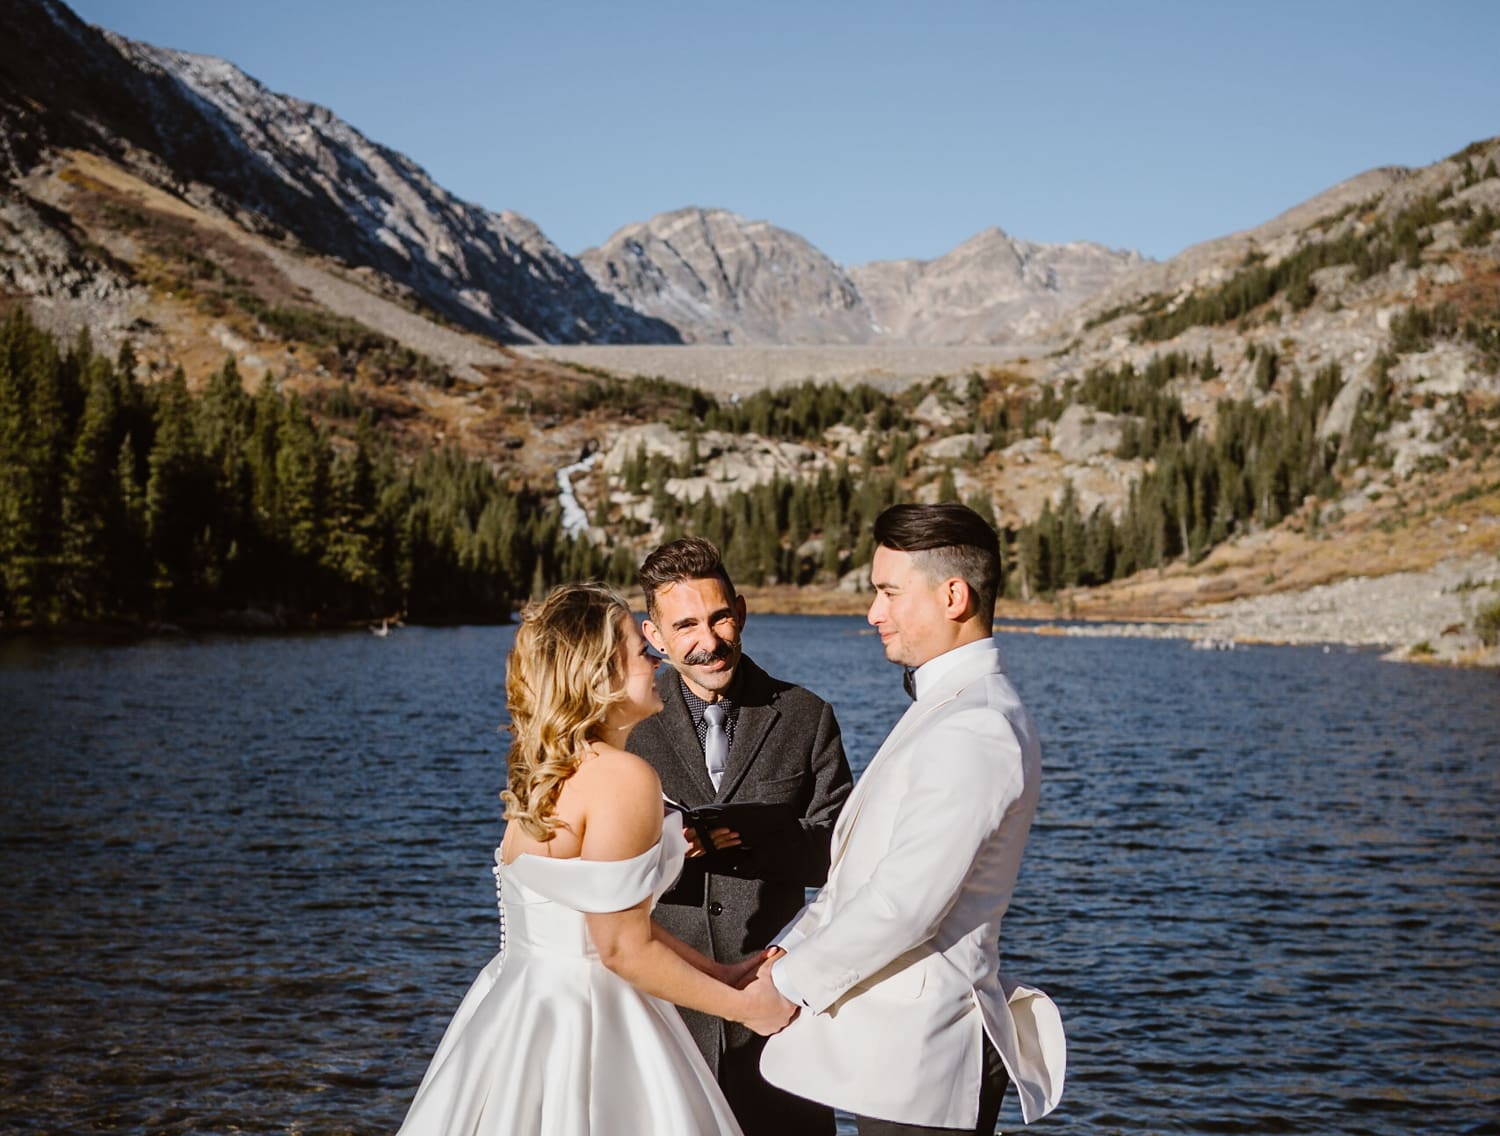 Officiant starting an elopement ceremony during the spring Colorado elopement.